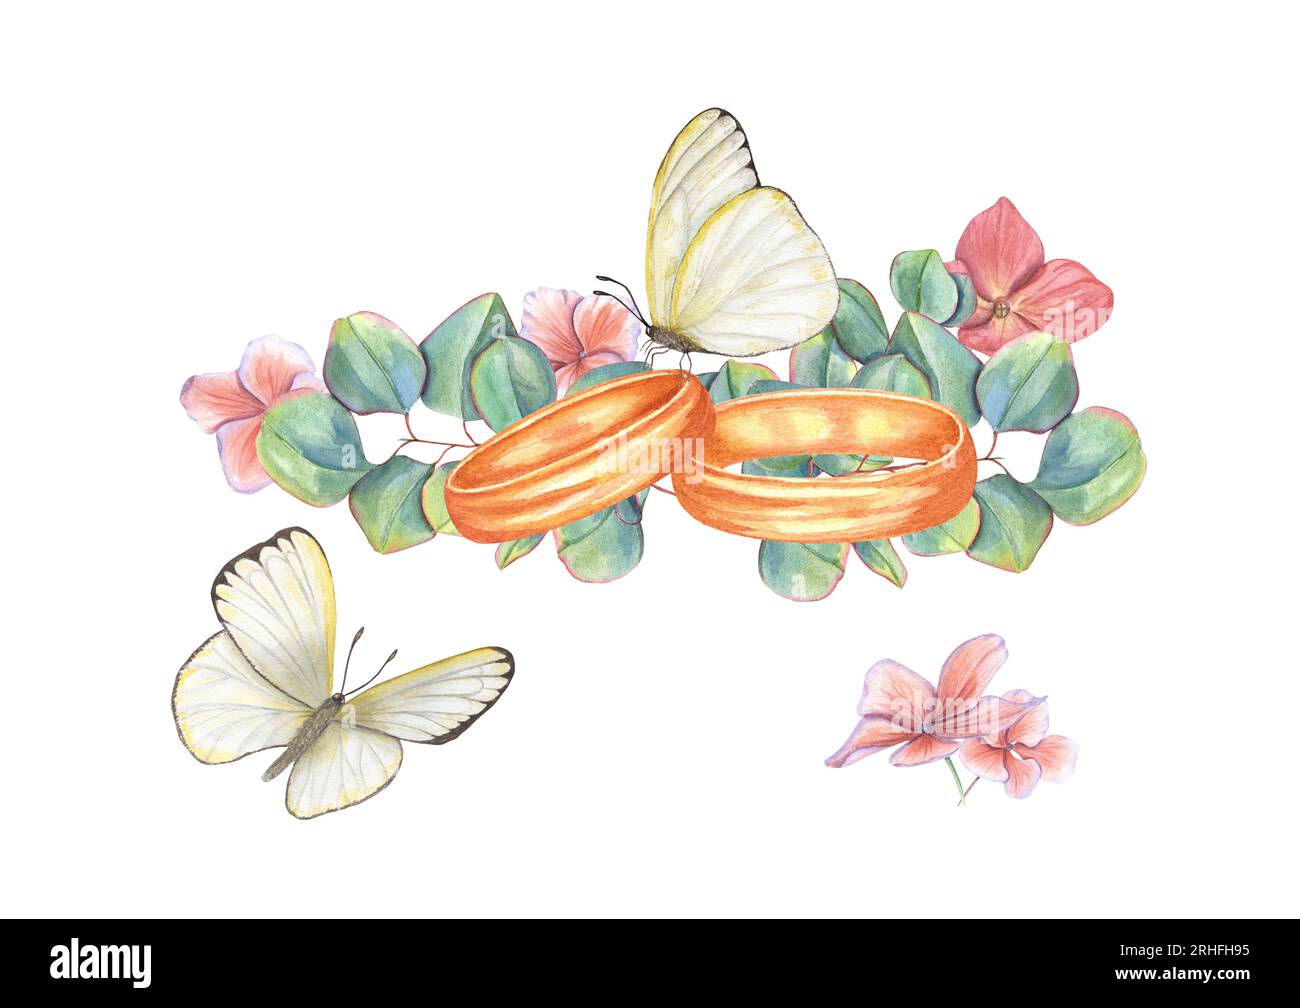 Composition with Wedding Rings, Eucalyptus Branches, Hydrangea Flowers and Fluttering Butterflies. Watercolor illustration isolated on white Stock Photo